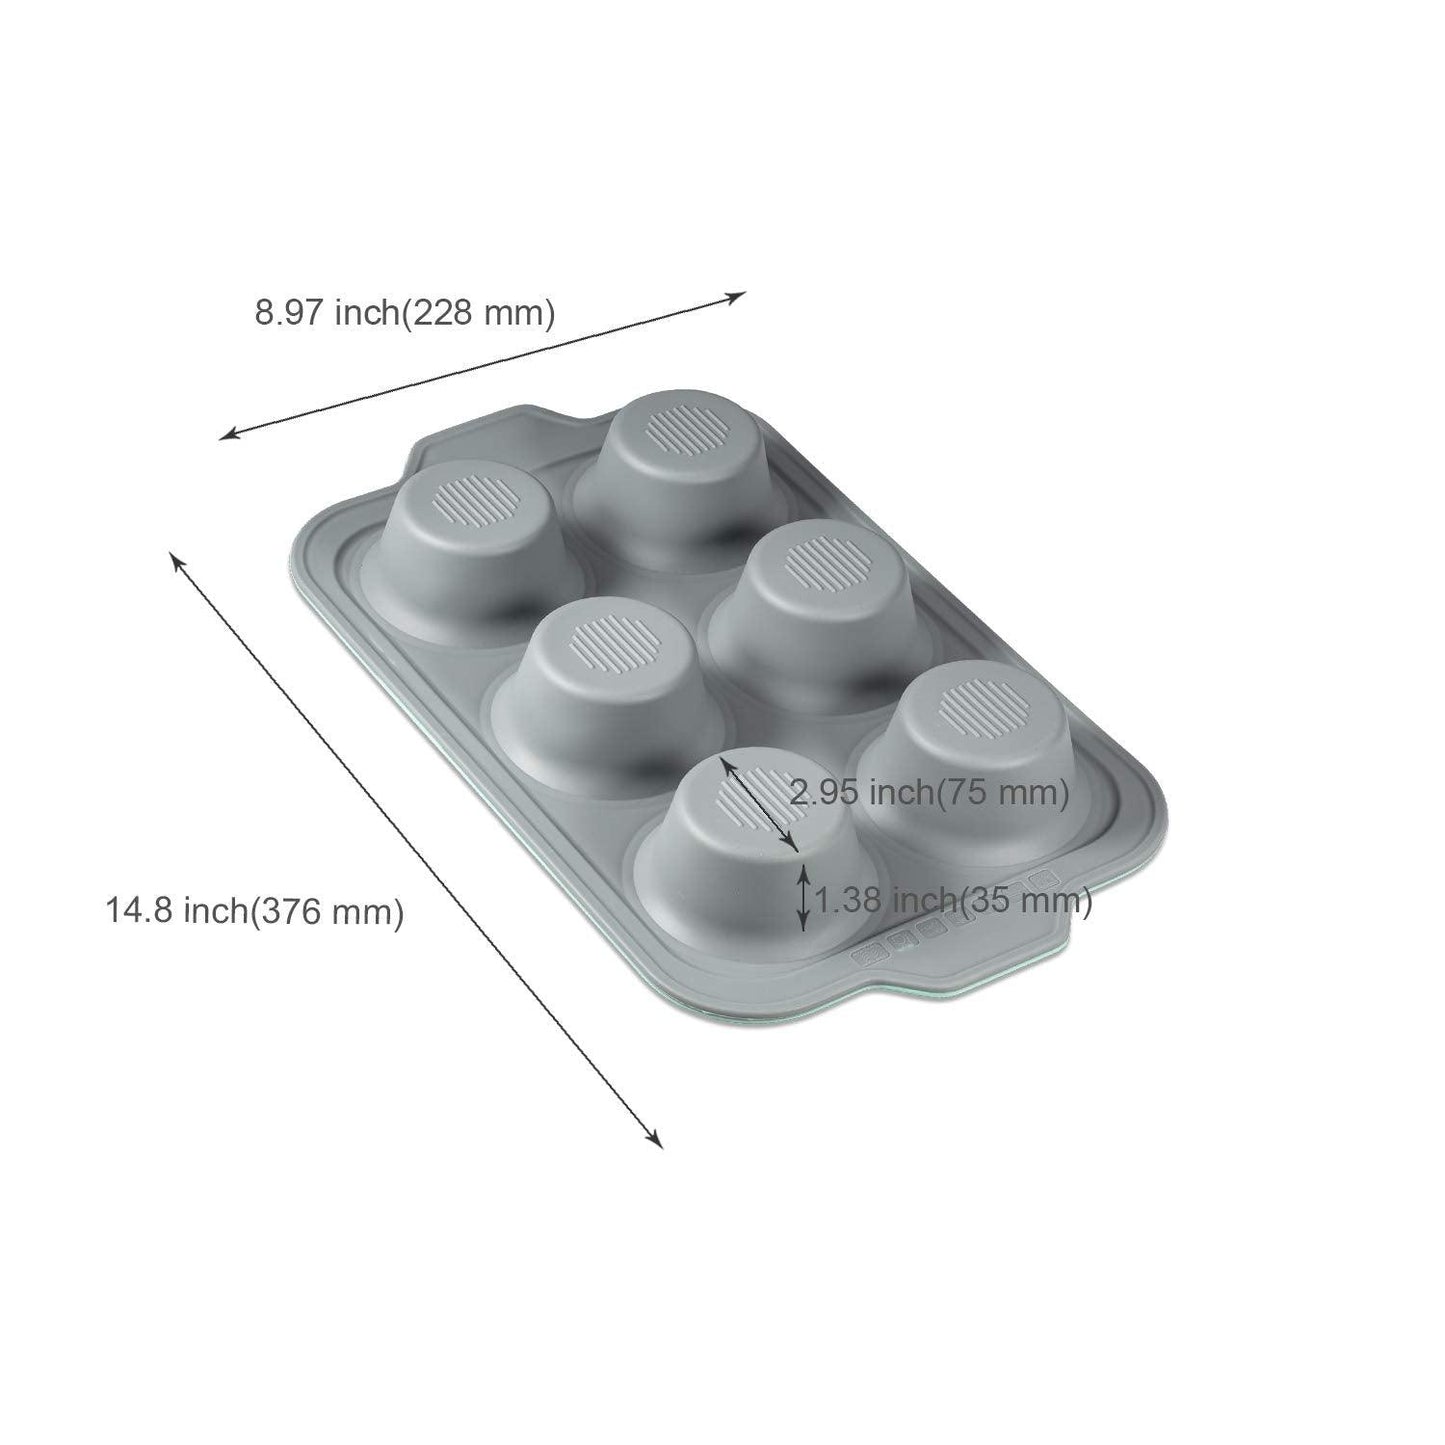 JXWING 6 Cups Non-stick Silicone Cupcake Baking Pan with Ergonomics Grips, Premium Stainless Steel Core Muffin Pan, Aqua Sky - CookCave